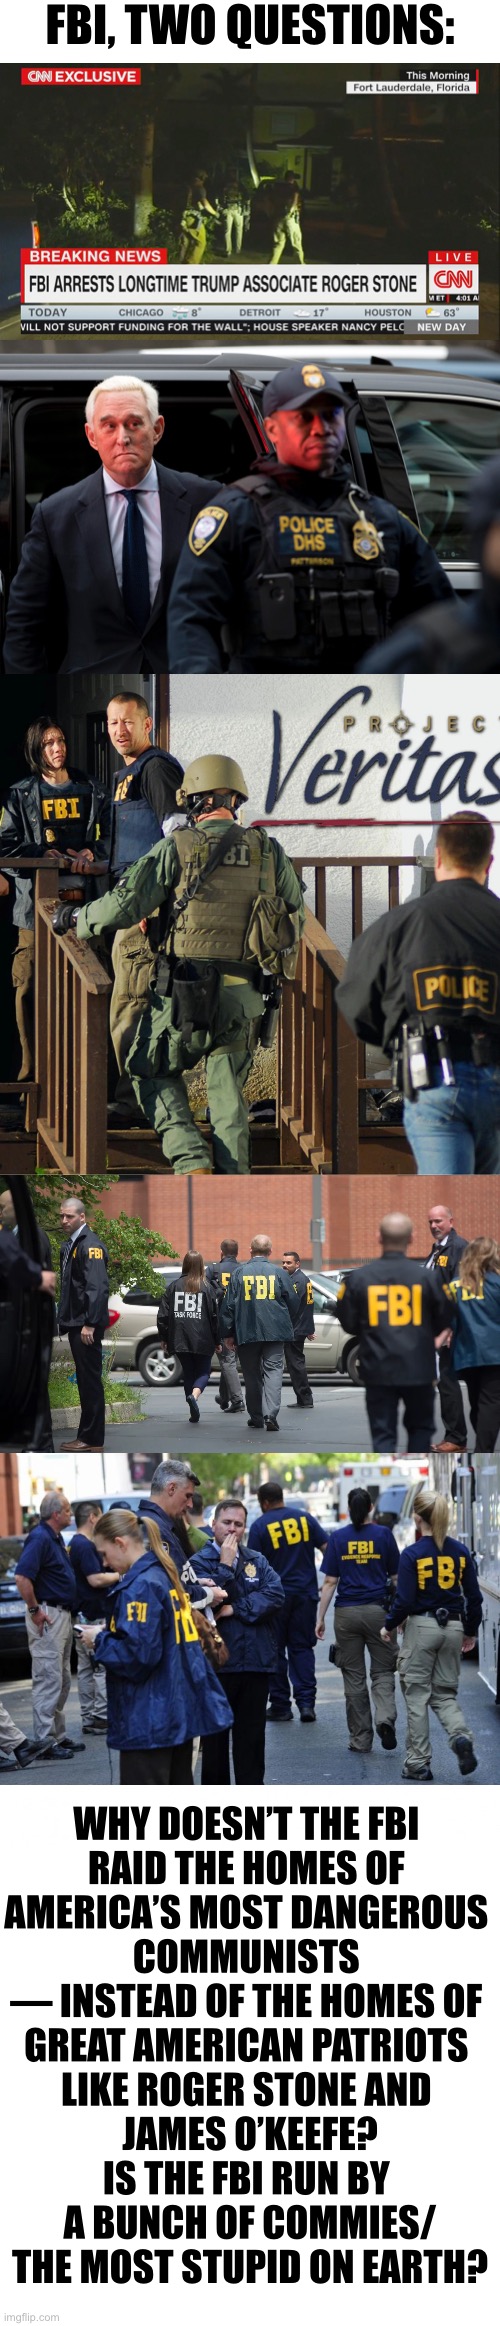 FBI — two questions! | FBI, TWO QUESTIONS:; WHY DOESN’T THE FBI 
RAID THE HOMES OF 
AMERICA’S MOST DANGEROUS 
COMMUNISTS 
— INSTEAD OF THE HOMES OF 
GREAT AMERICAN PATRIOTS 
LIKE ROGER STONE AND 
JAMES O’KEEFE?
IS THE FBI RUN BY 
A BUNCH OF COMMIES/
THE MOST STUPID ON EARTH? | image tagged in fbi,why is the fbi here,fbi investigation,democrat party,joe biden,communists | made w/ Imgflip meme maker